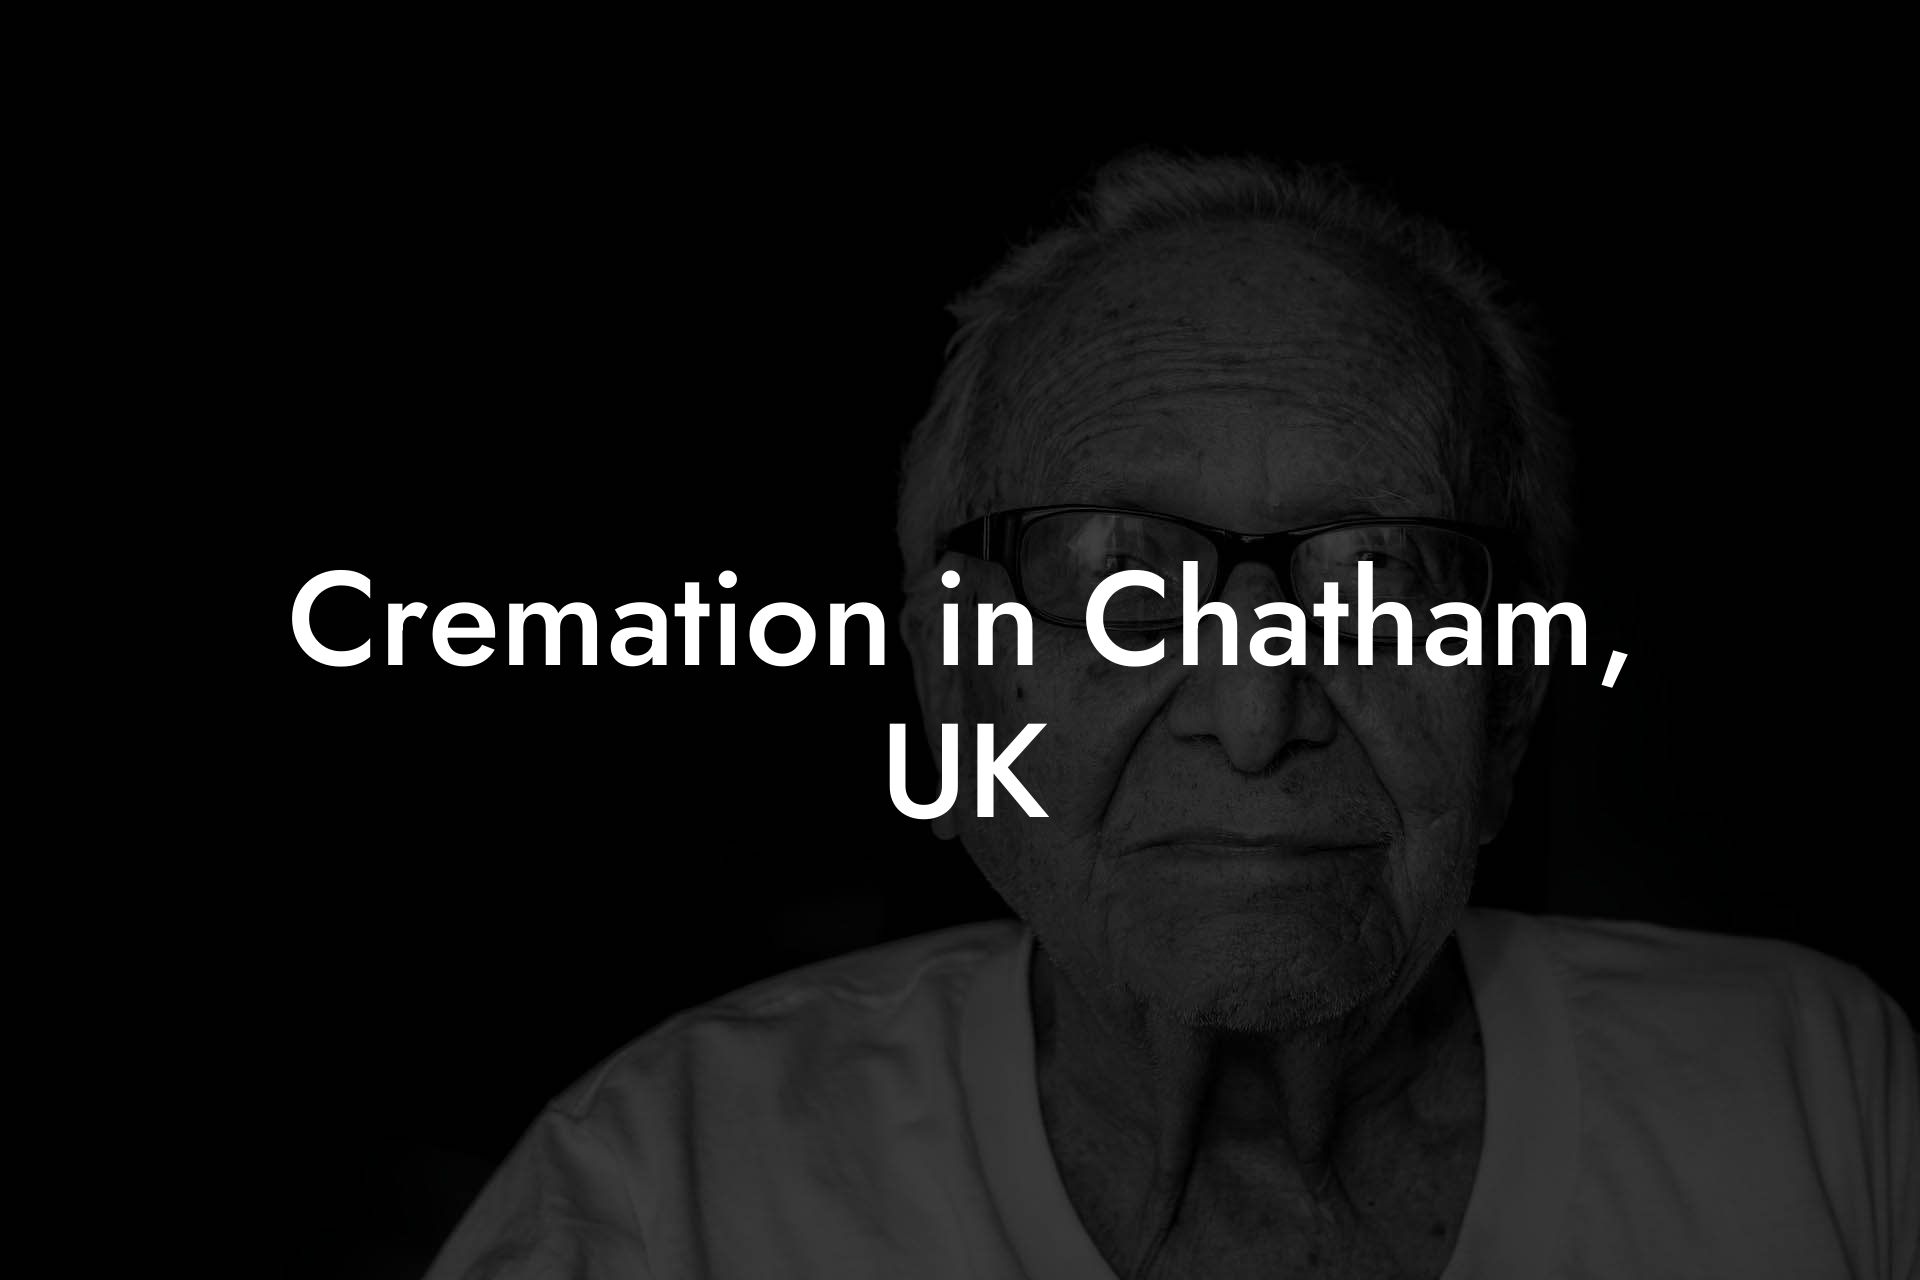 Cremation in Chatham, UK